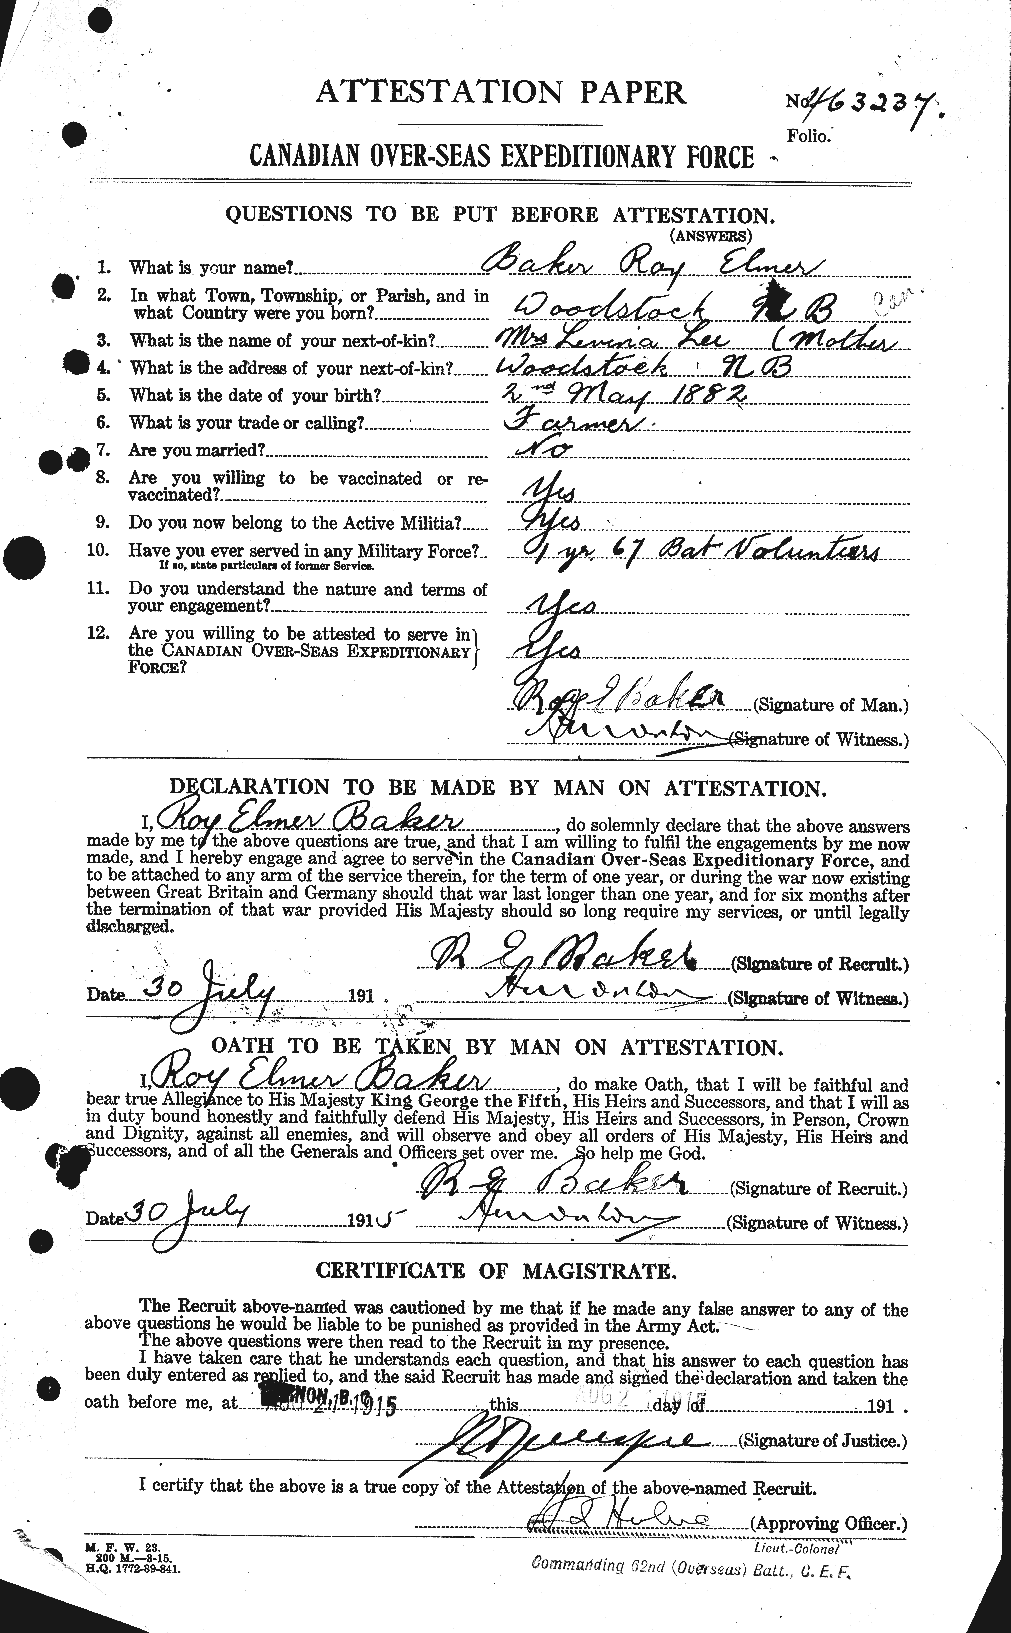 Personnel Records of the First World War - CEF 221501a